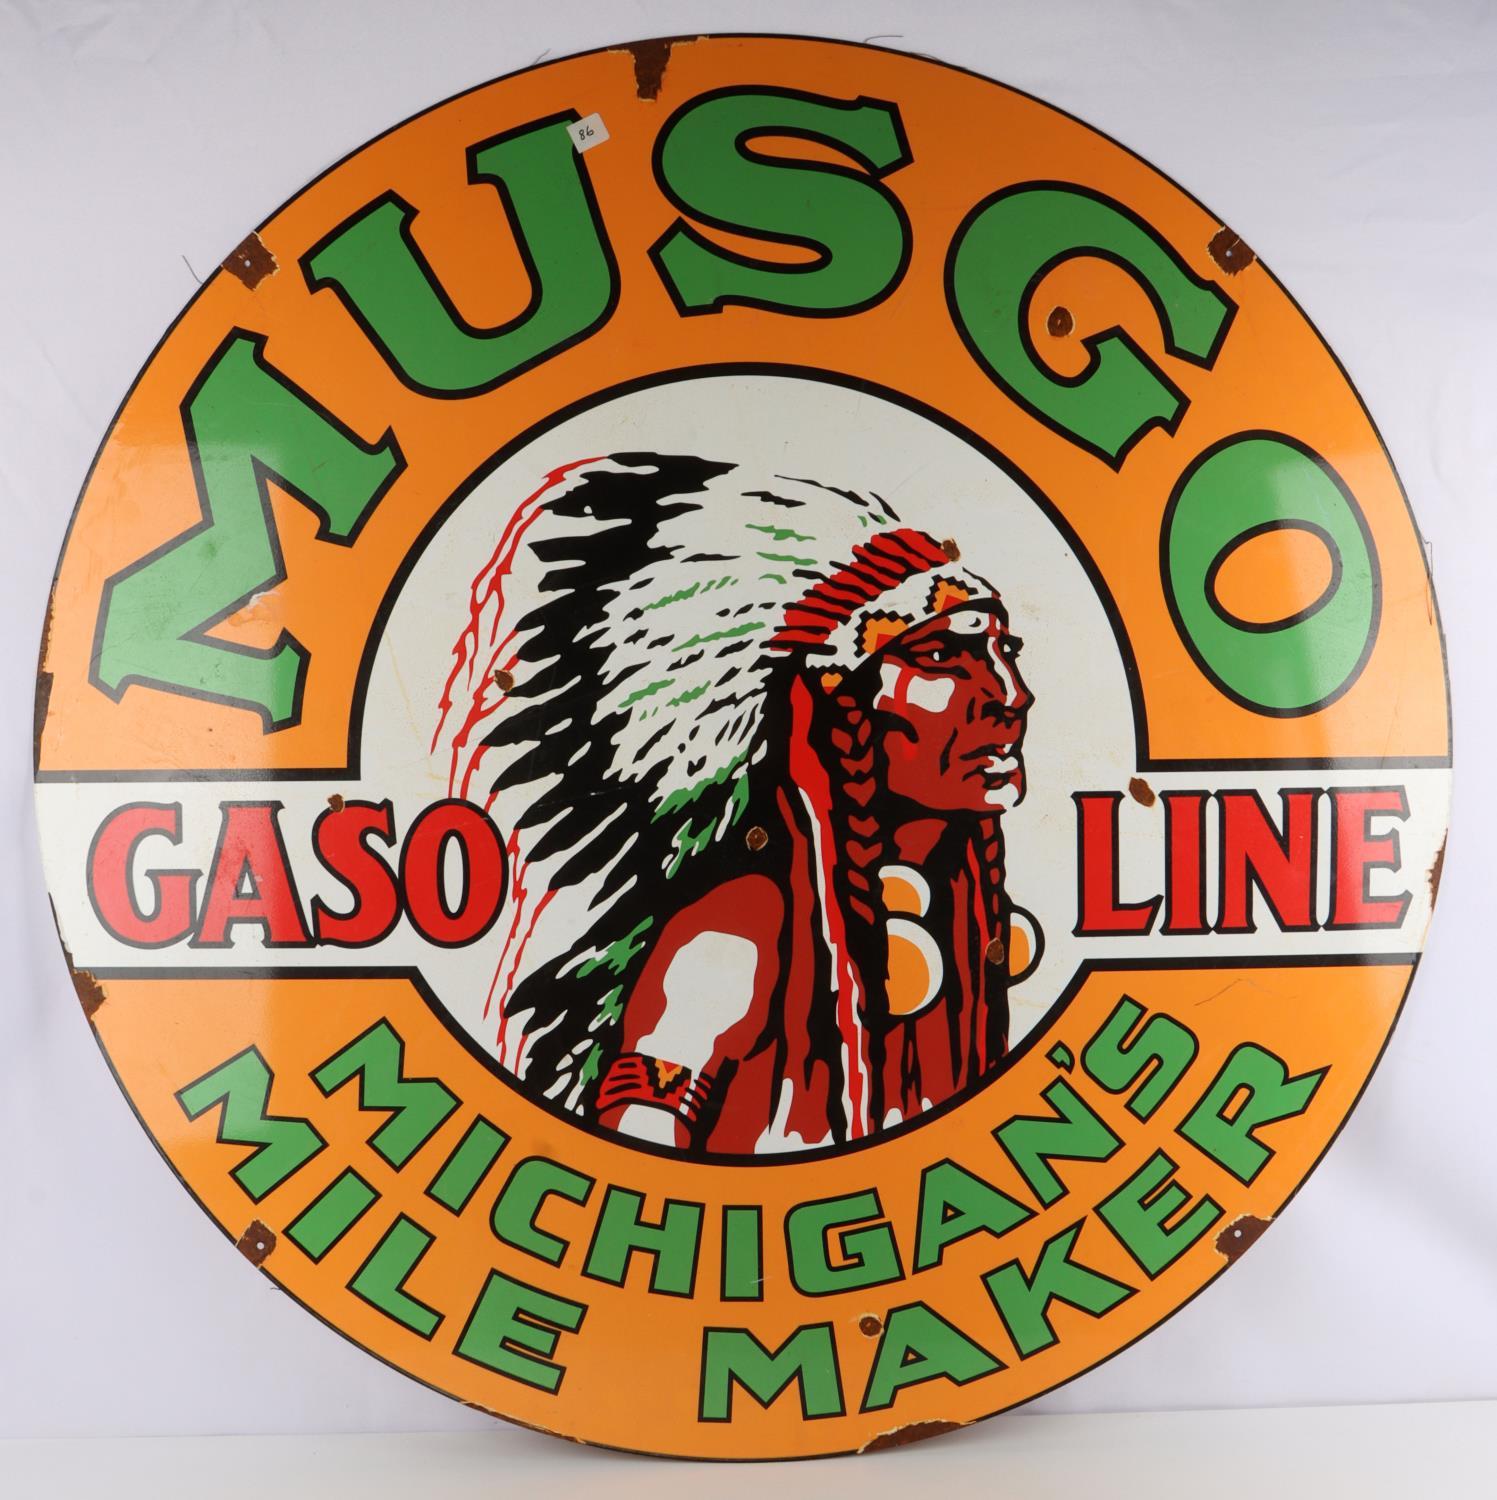 48 INCH MUSGO GASOLINE PORCELAIN DOUBLE SIDED SIGN